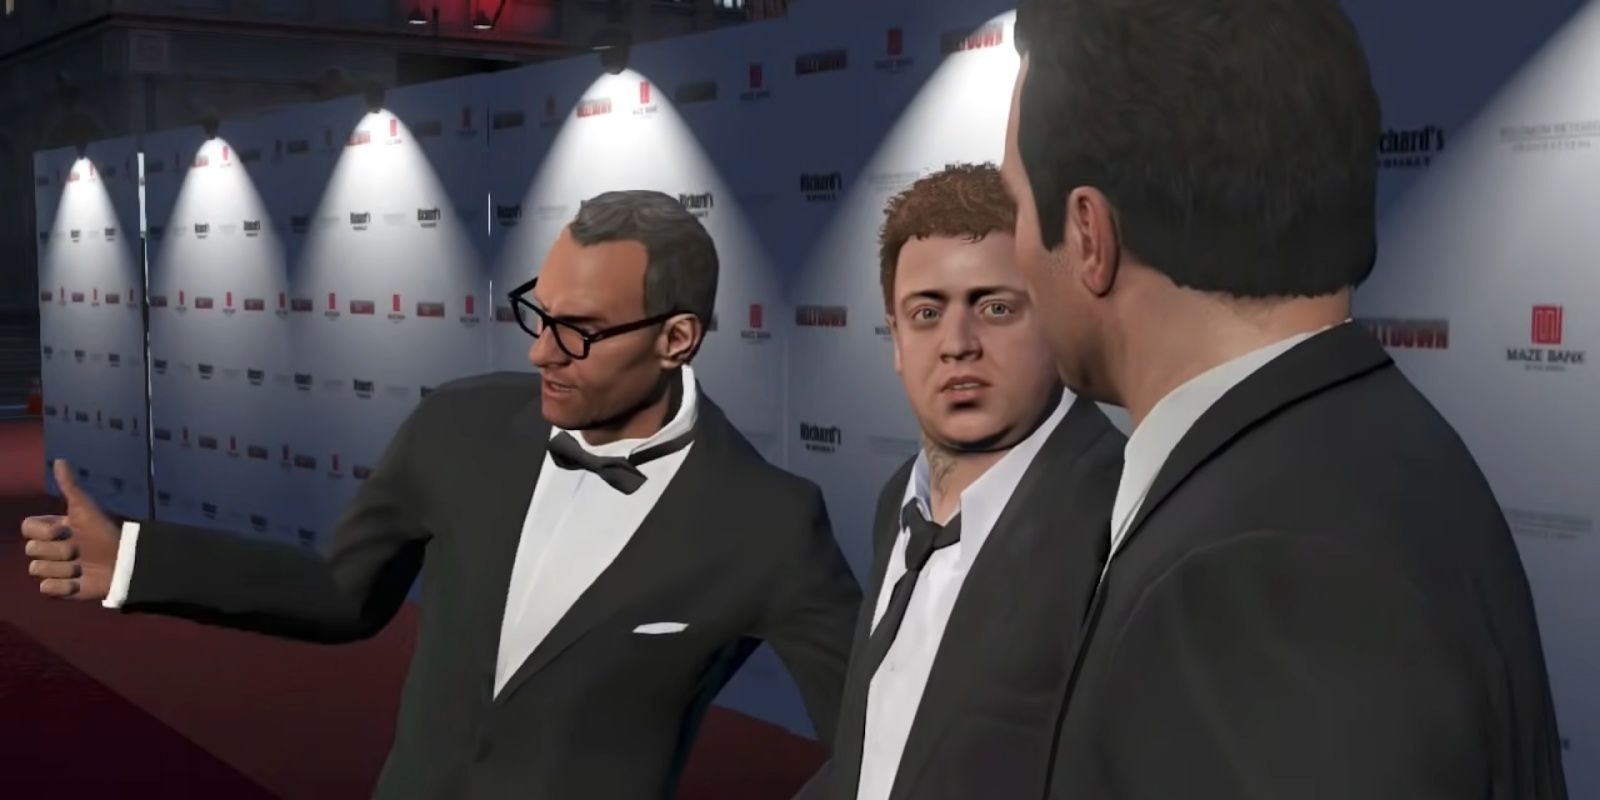 Devin, Jimmy, and Michael standing on the red carpet. Devin gives a thumbs up while Jimmy looks at Michael concerned